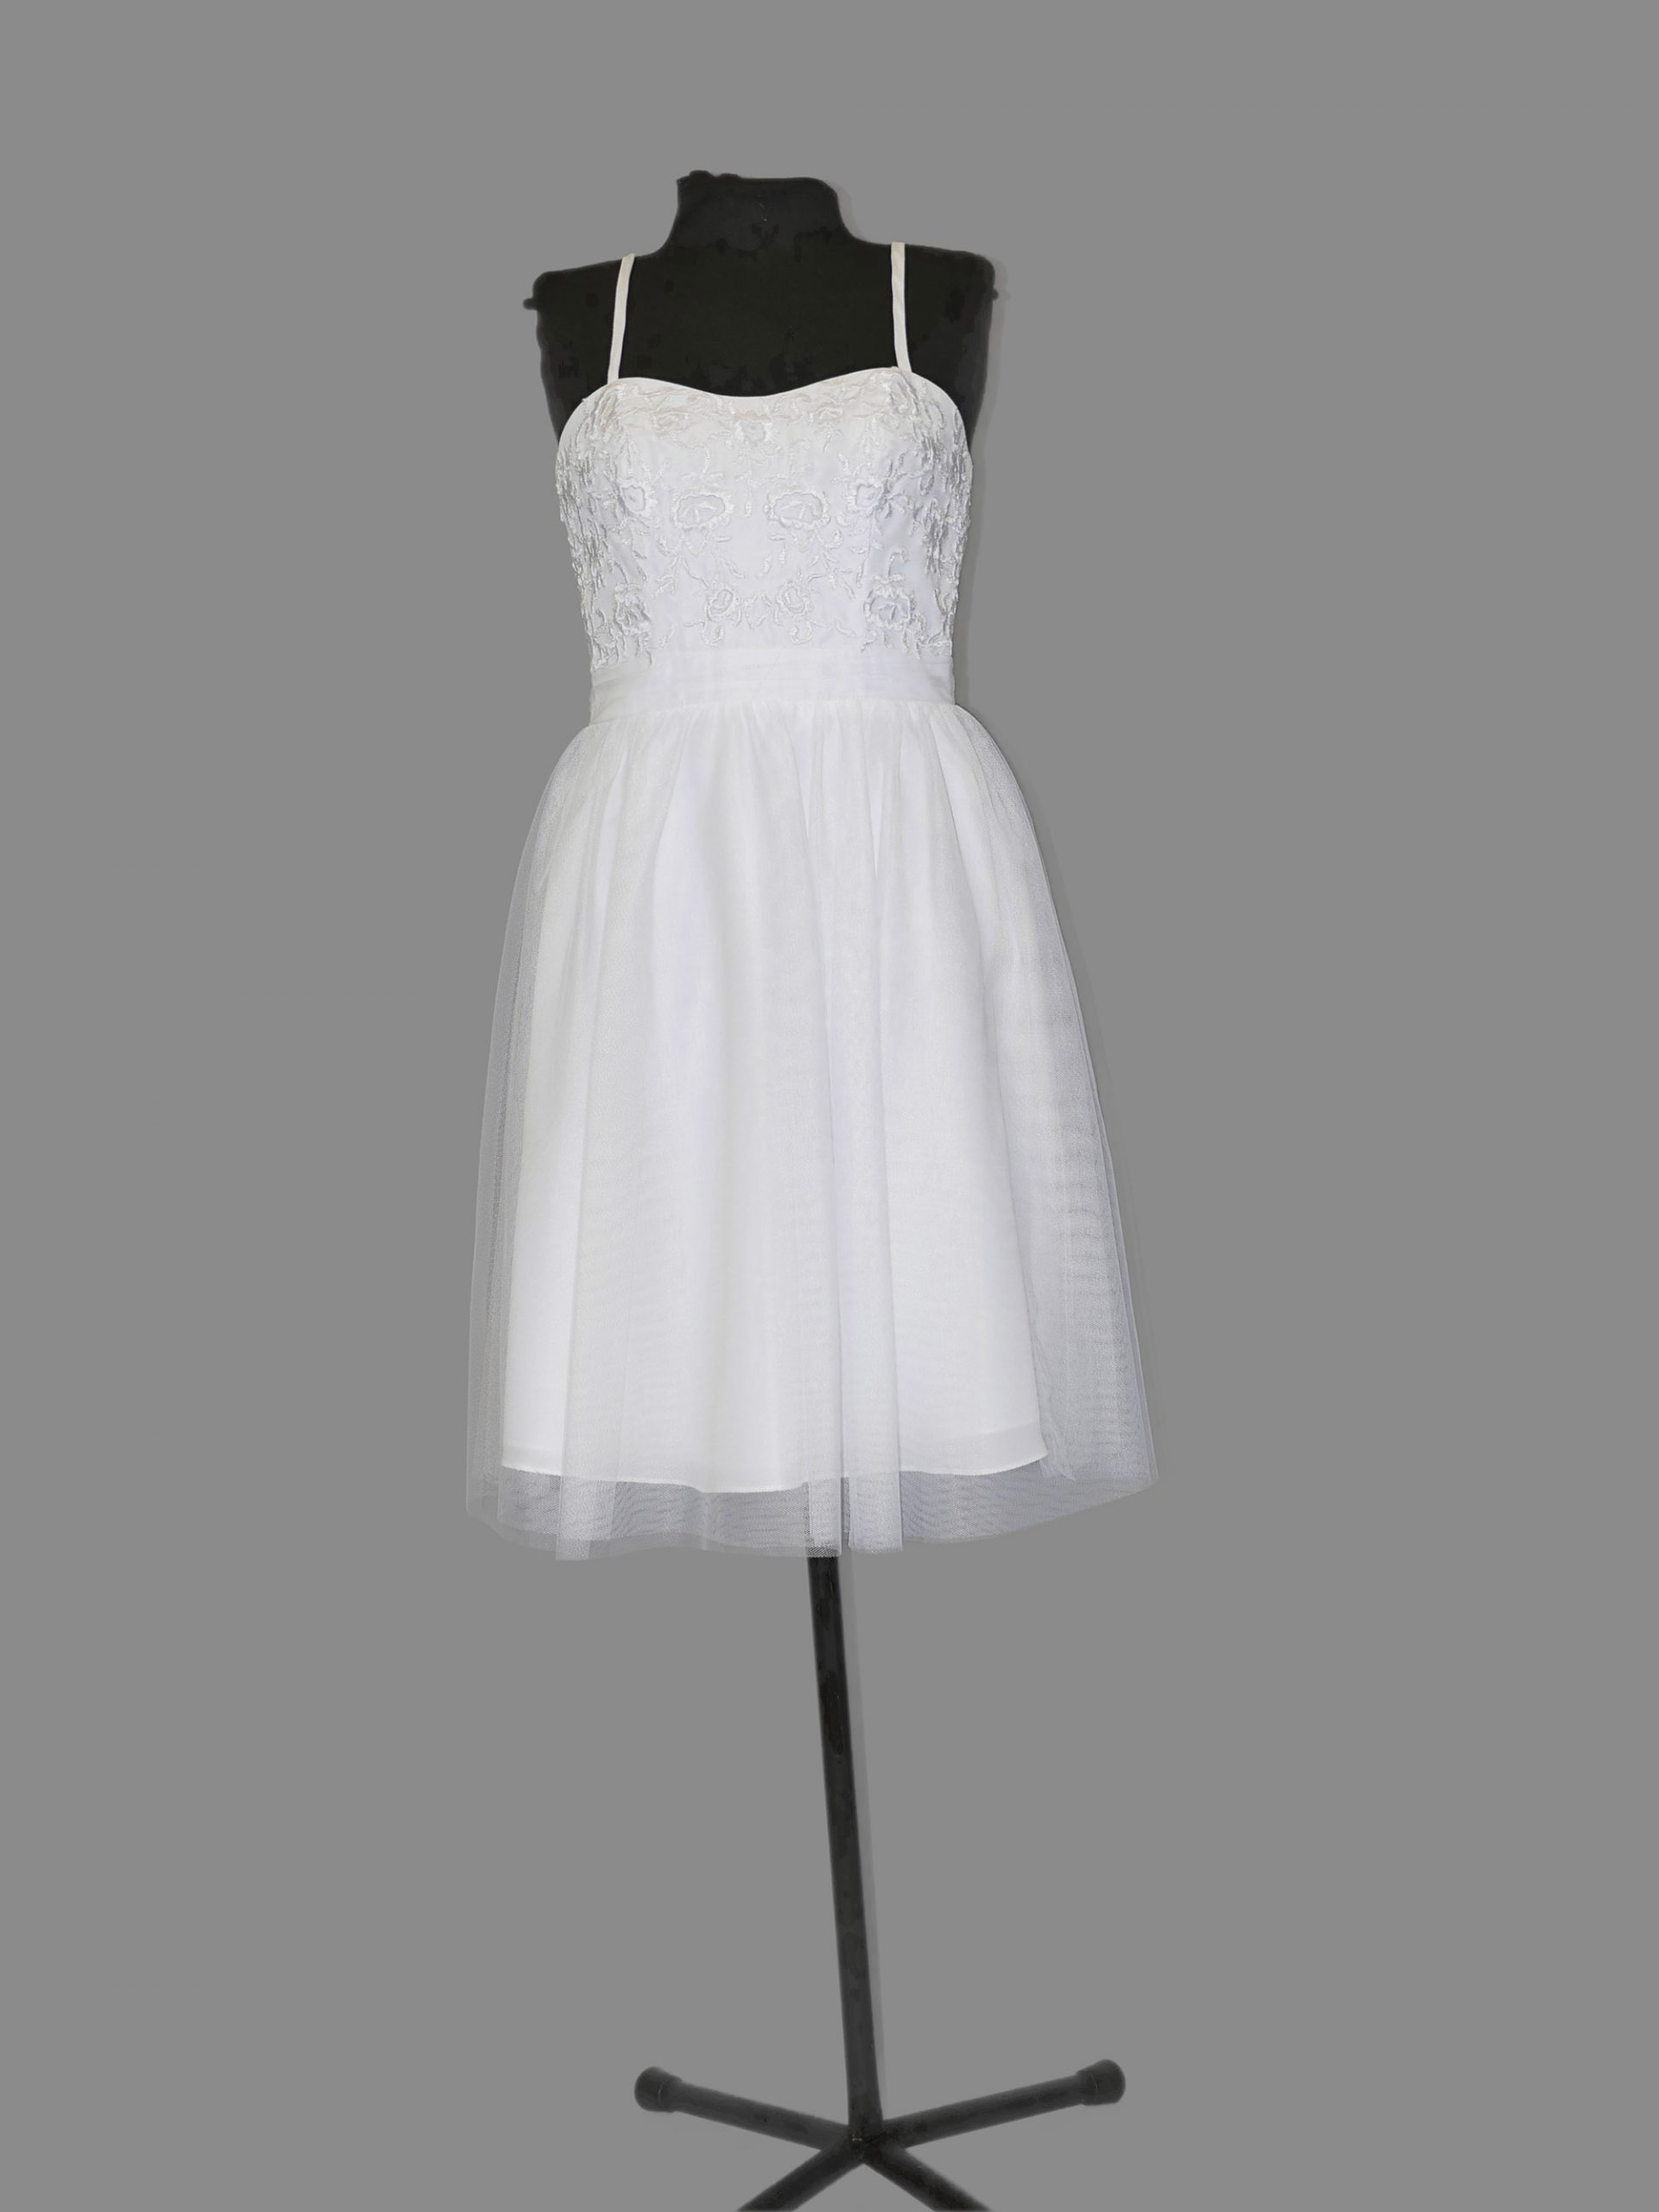 White Alfred Angelo cocktail dress, A8633S, generous Size 4